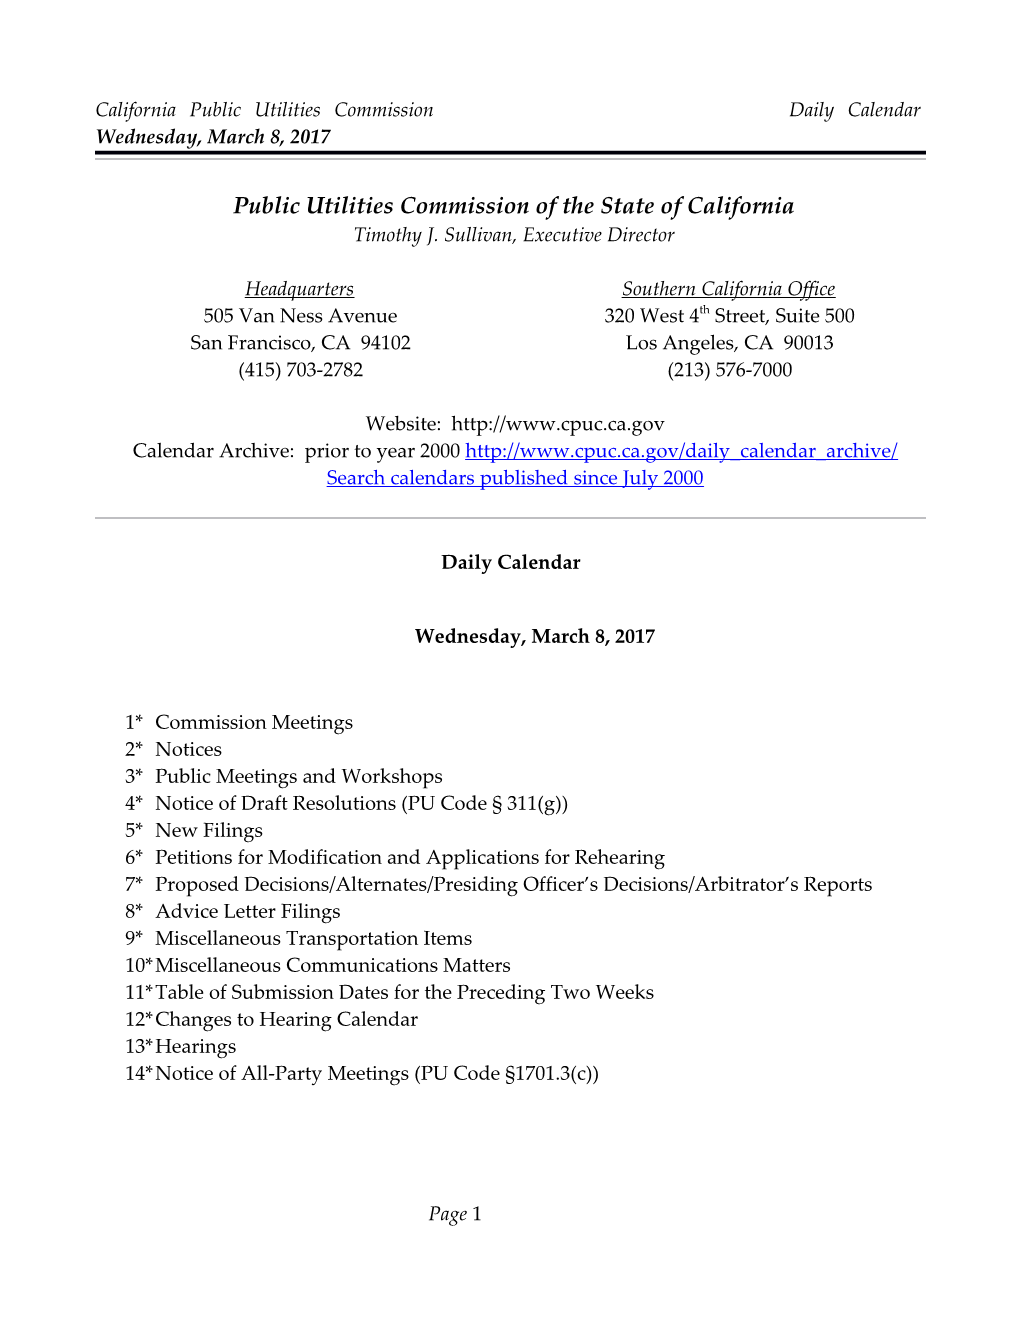 California Public Utilities Commission Daily Calendar Wednesday, March 8, 2017